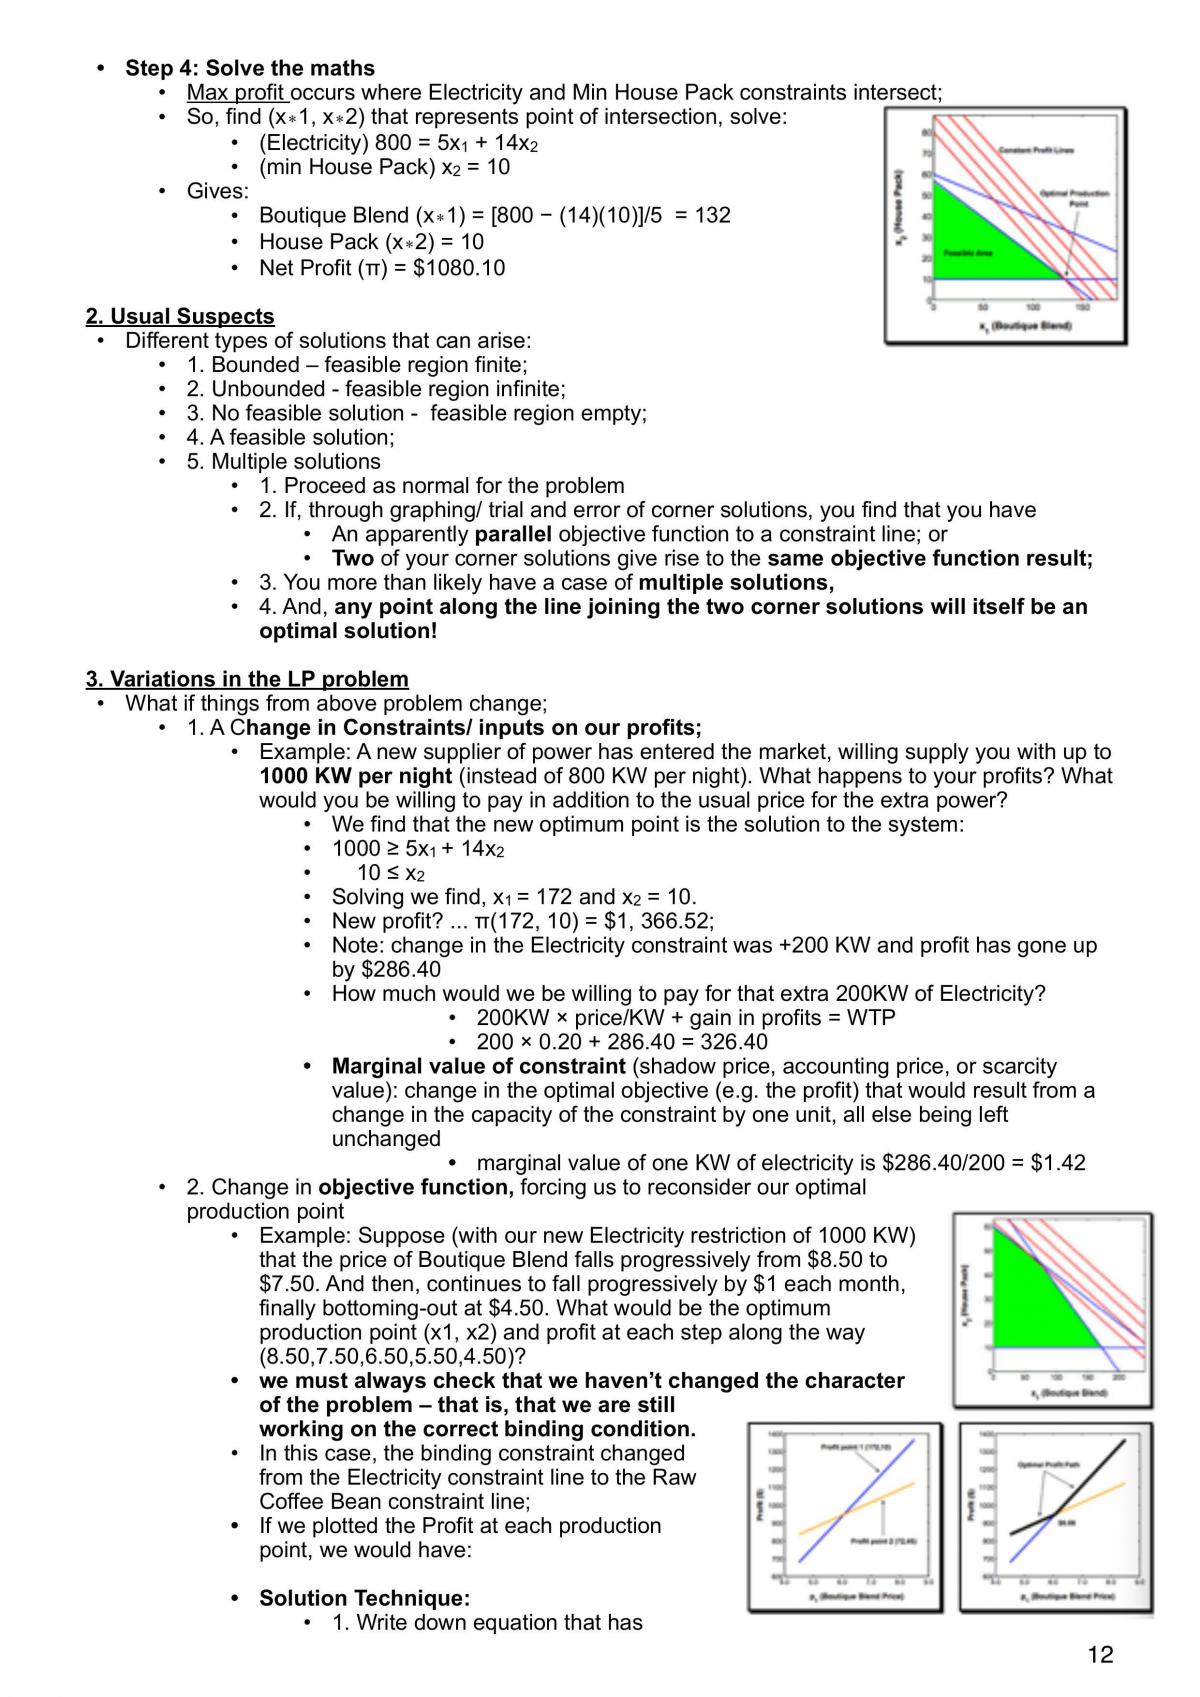 ECON1202 Study Notes - Page 12